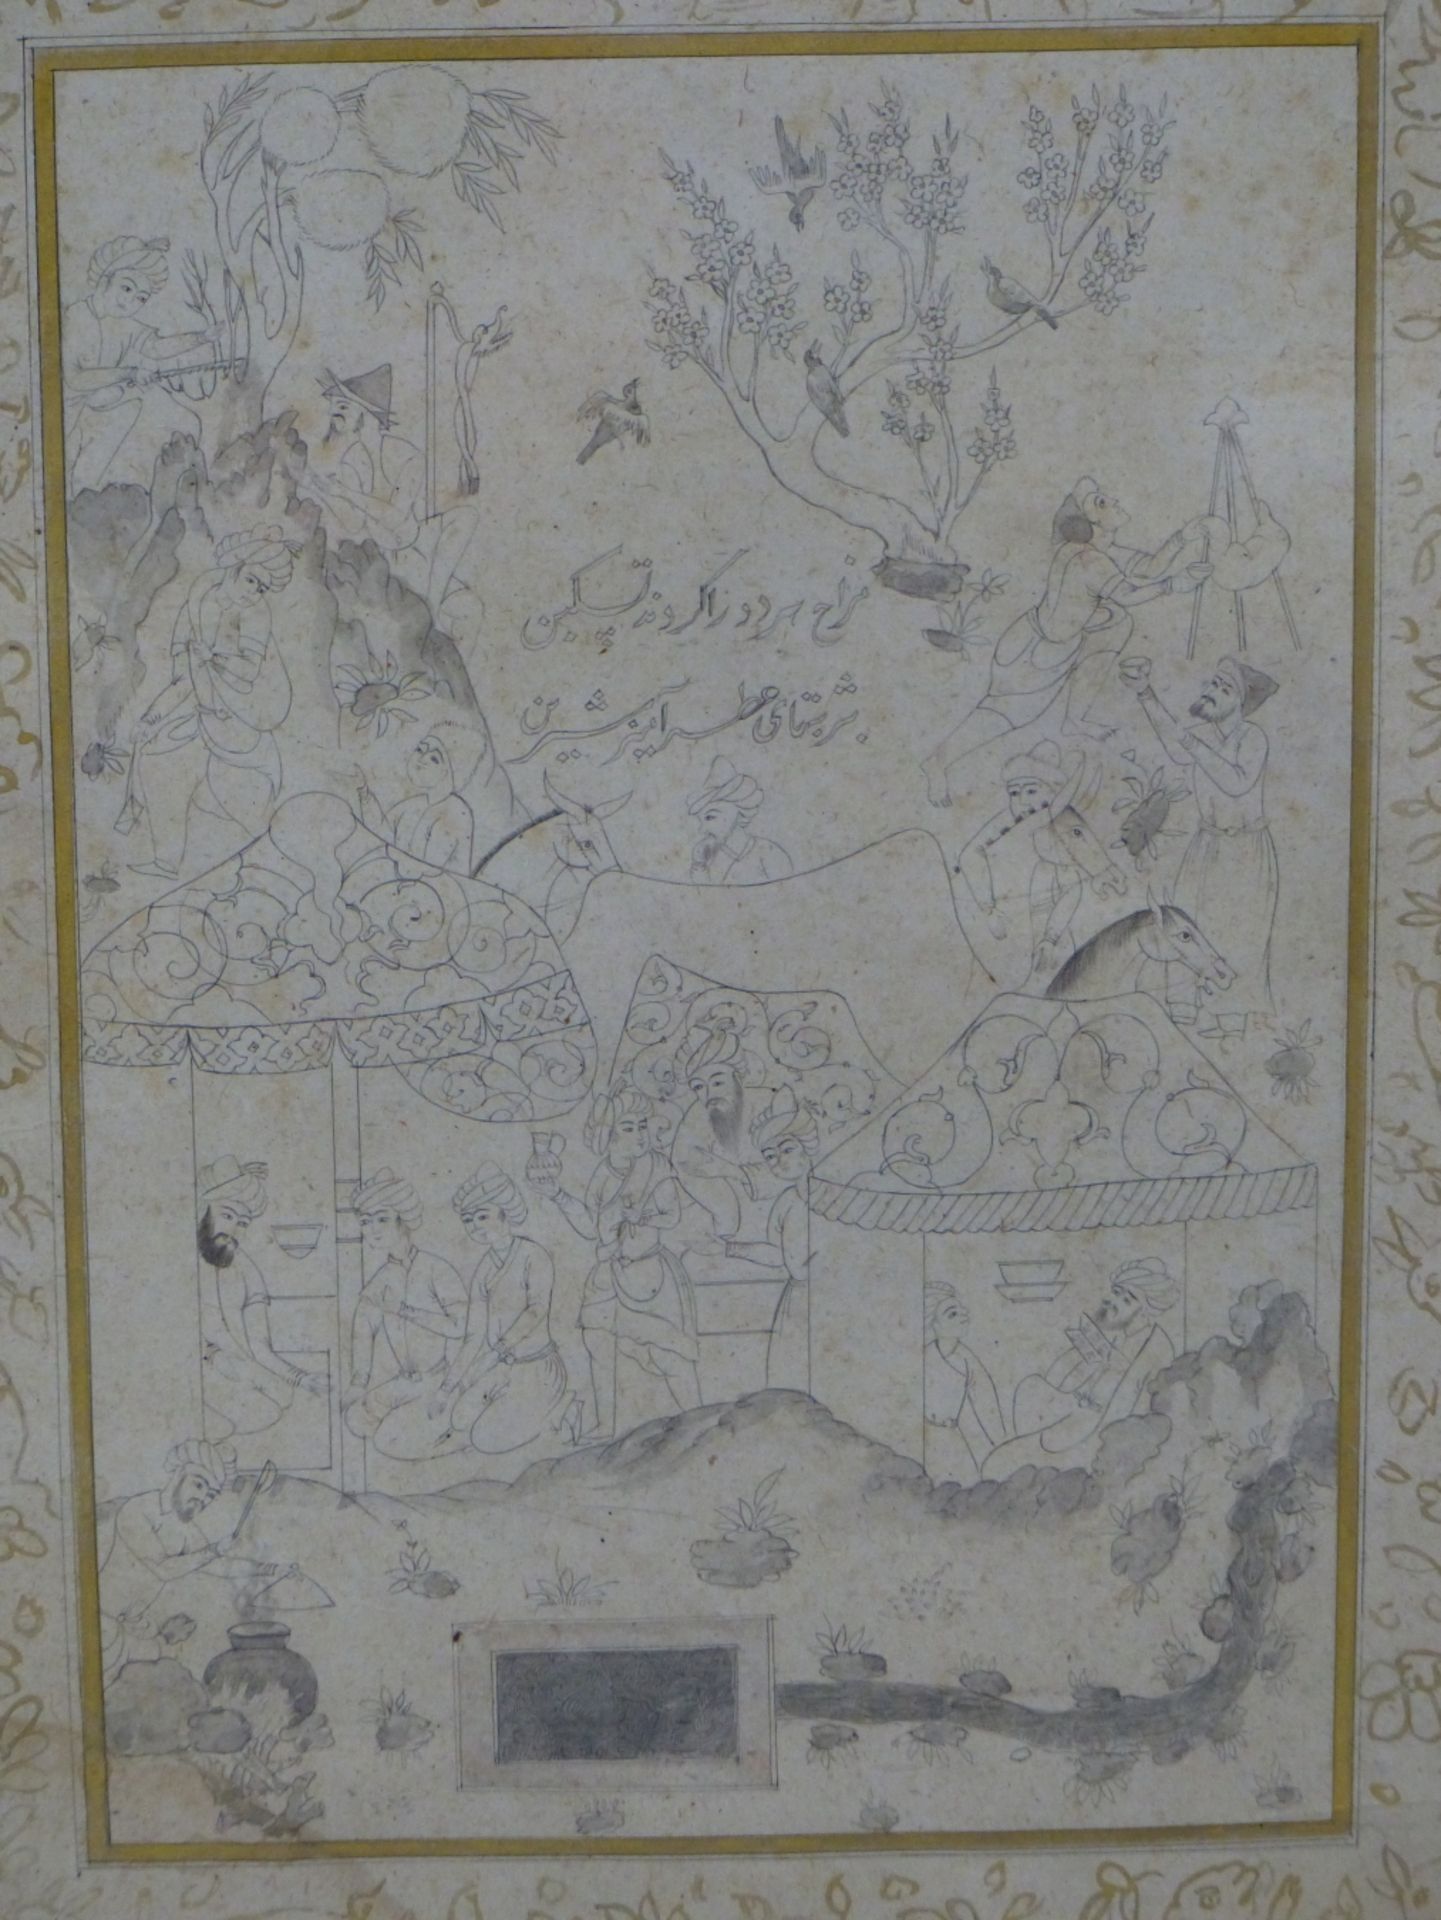 PERSIAN SCHOOL, 18THC. SAFAVID PAGE, DEPICTS A VILLAGE CELEBRATION WITHIN GILT BORDER OF ANIMALS.